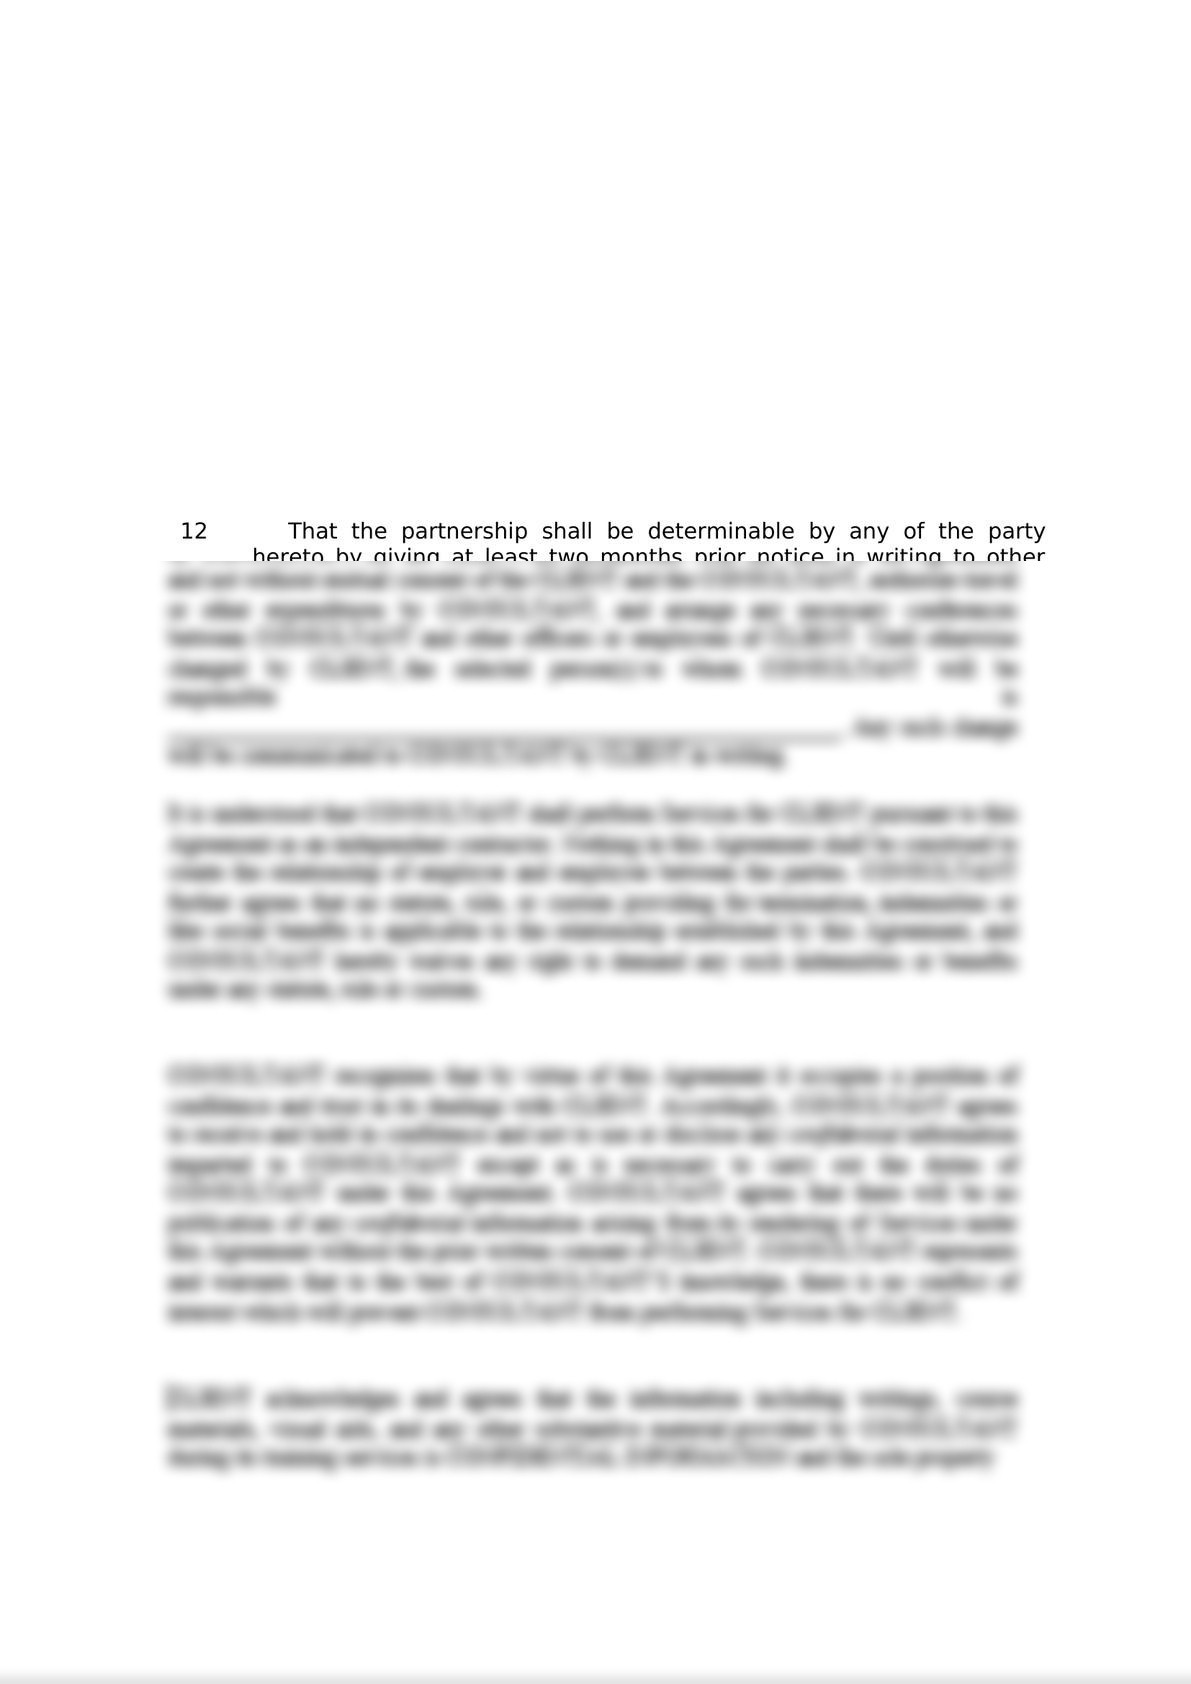 Partnership agreement sample.  For other related legal documents feel free to ask-2